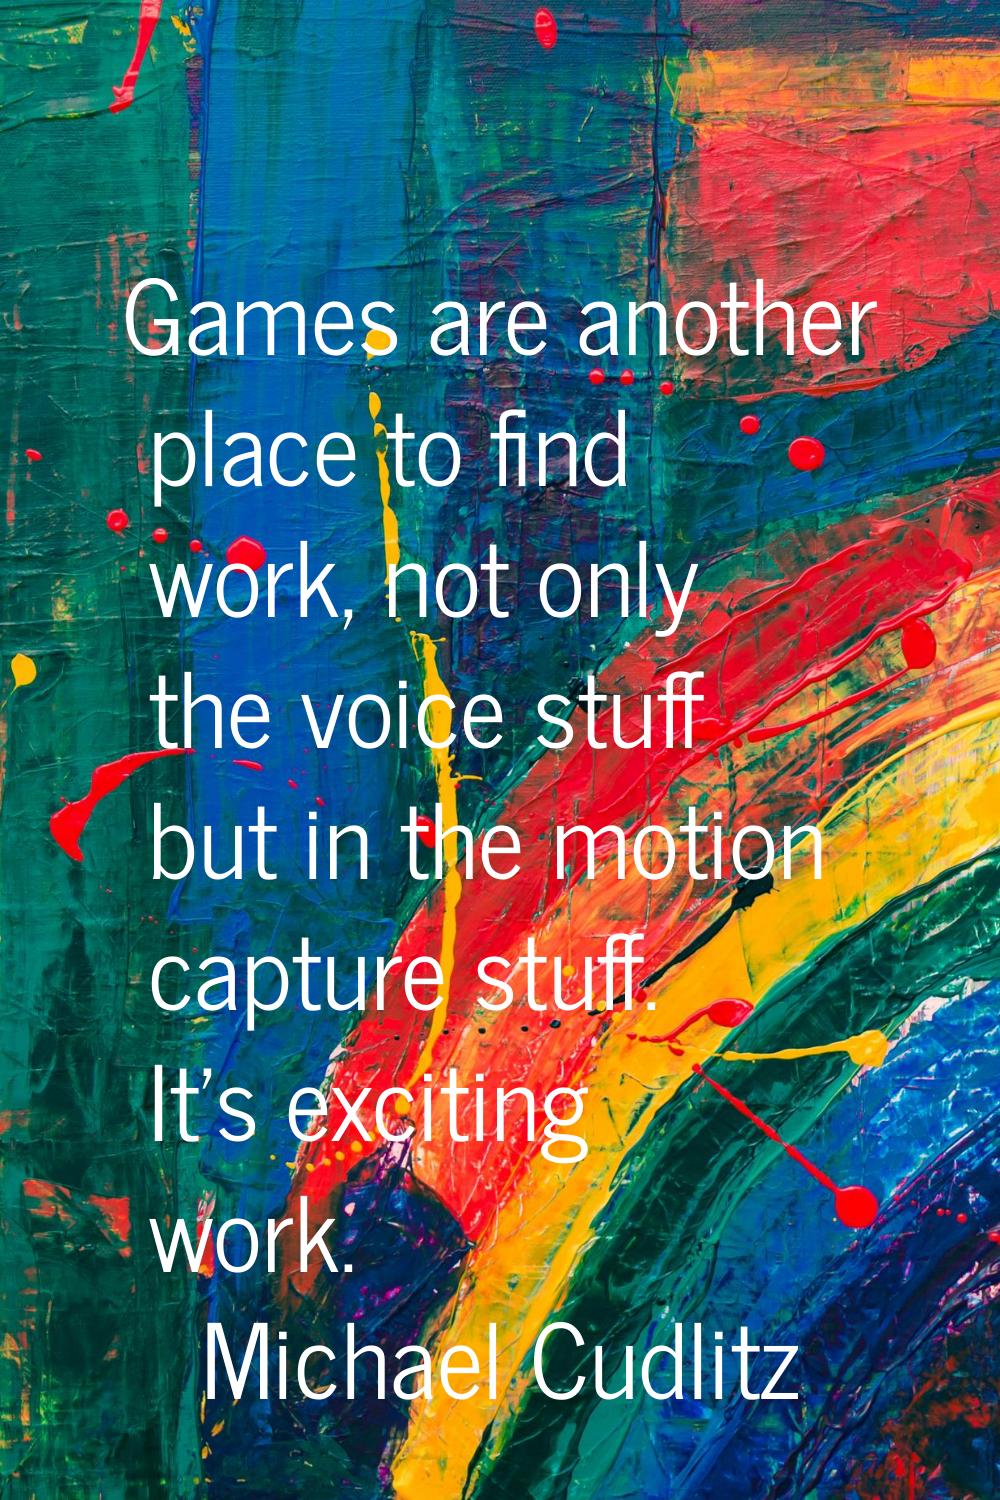 Games are another place to find work, not only the voice stuff but in the motion capture stuff. It'